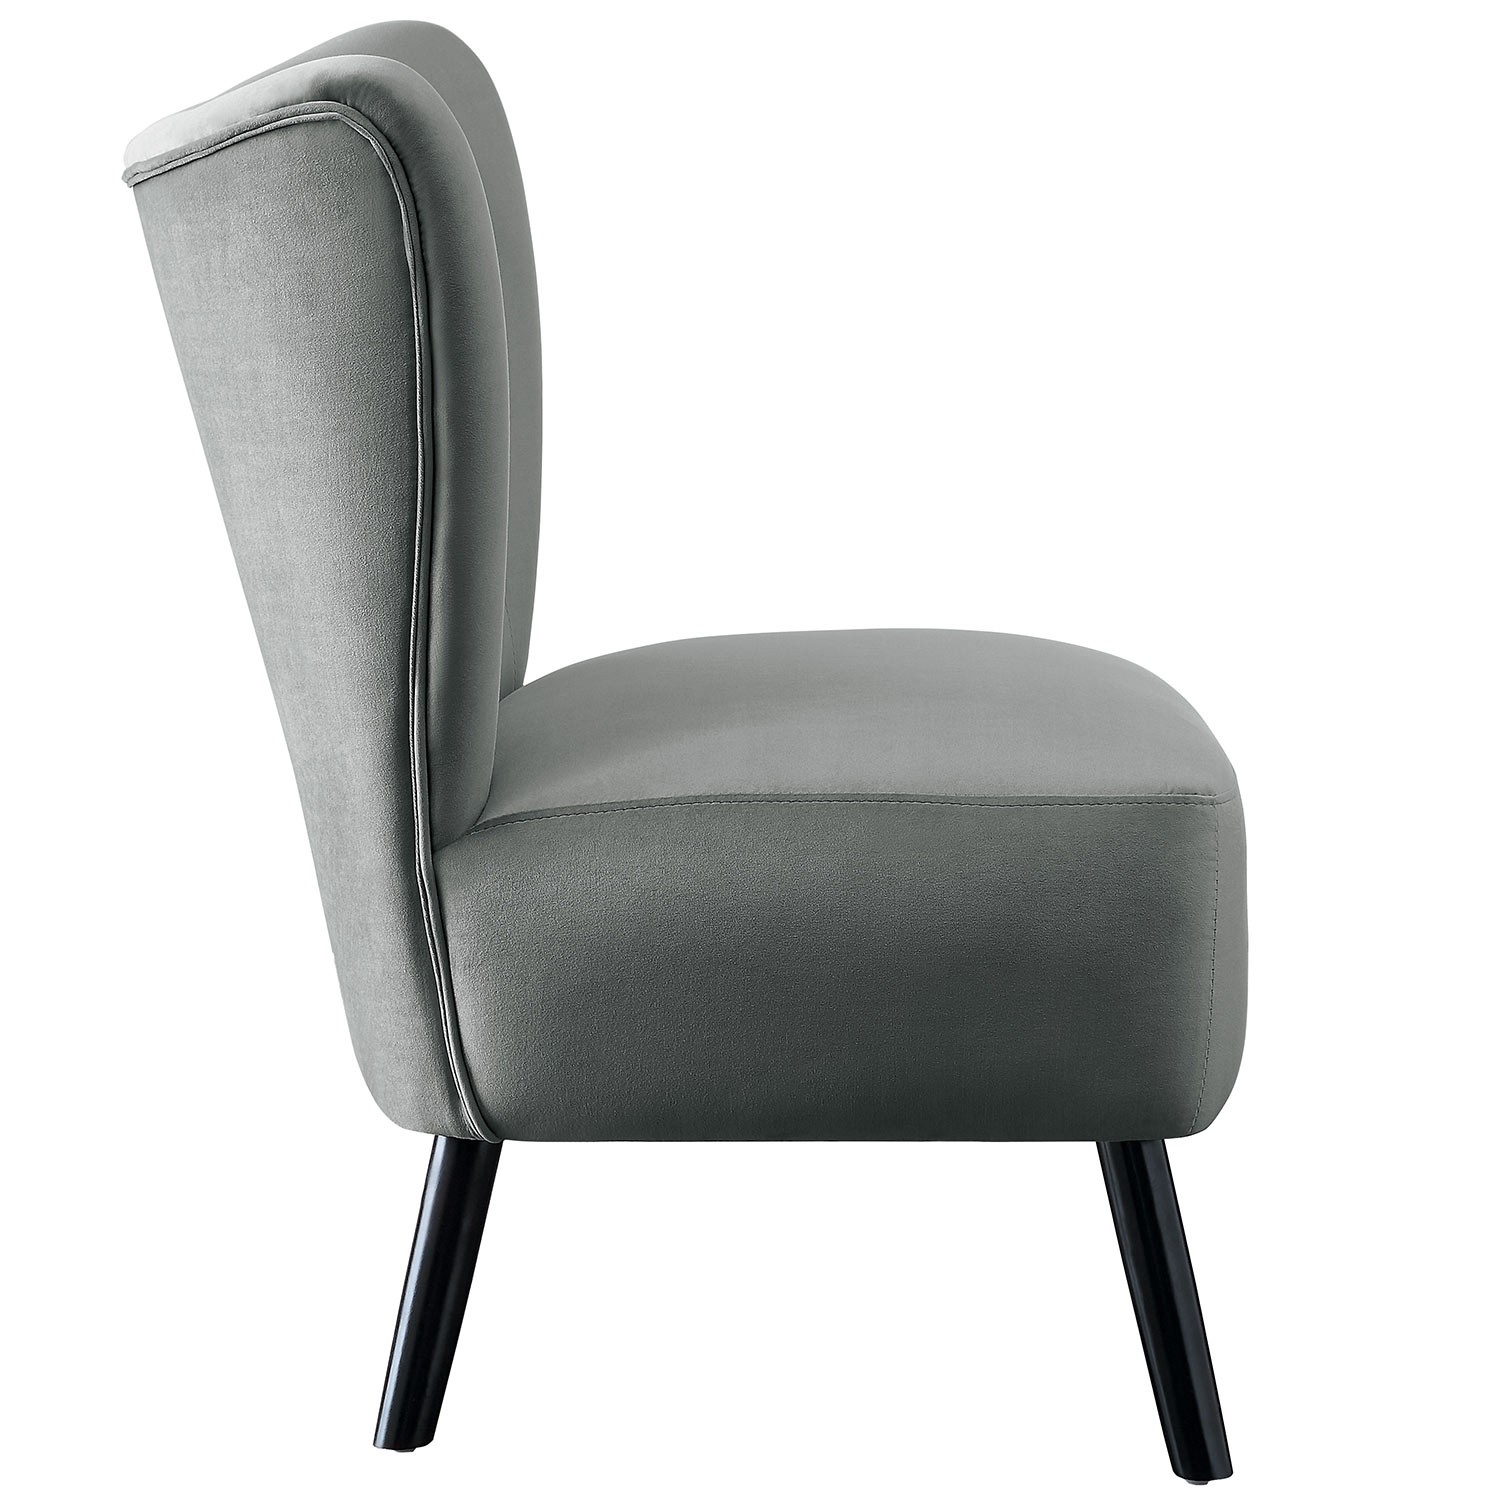 Homelegance Imani Accent Chair - Gray